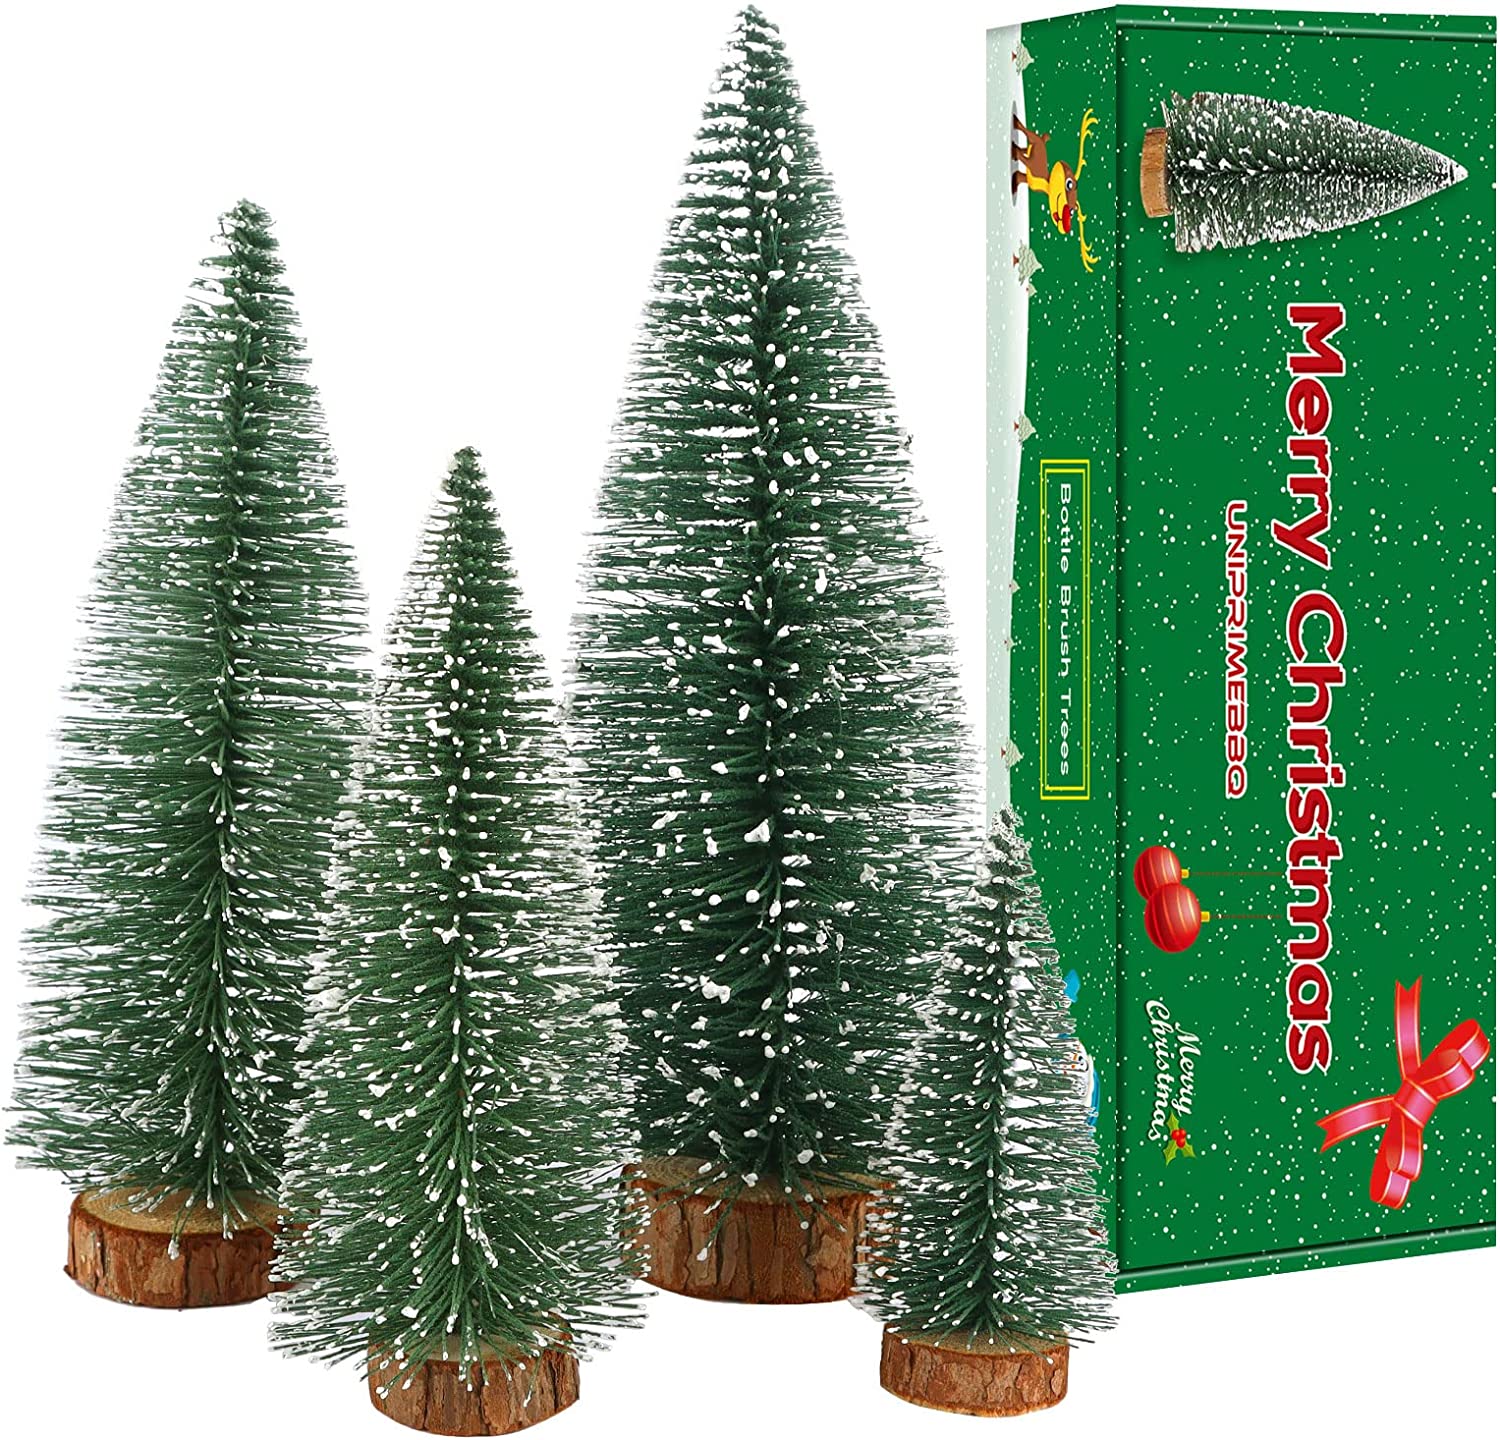 4pcs Mini Christmas Tree Small Pine Tree with Wooden Bases for Xmas Holiday Party Home Tabletop Tree Decor